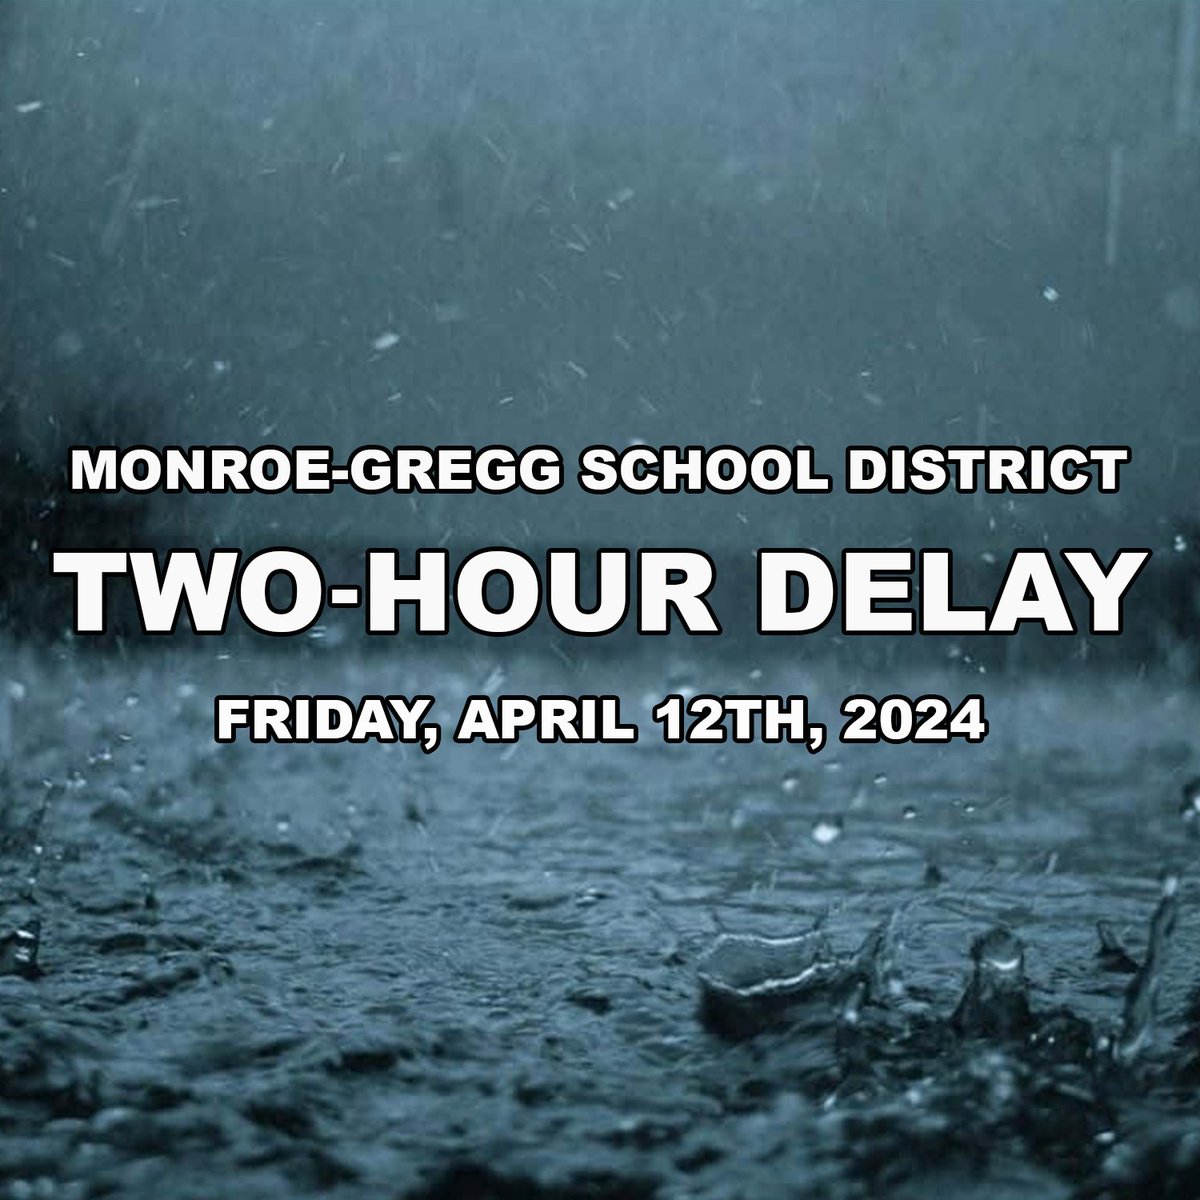 Due to flood related road issues, the Monroe-Gregg School District will be operating on a two-hour delay schedule tomorrow, April 12th.